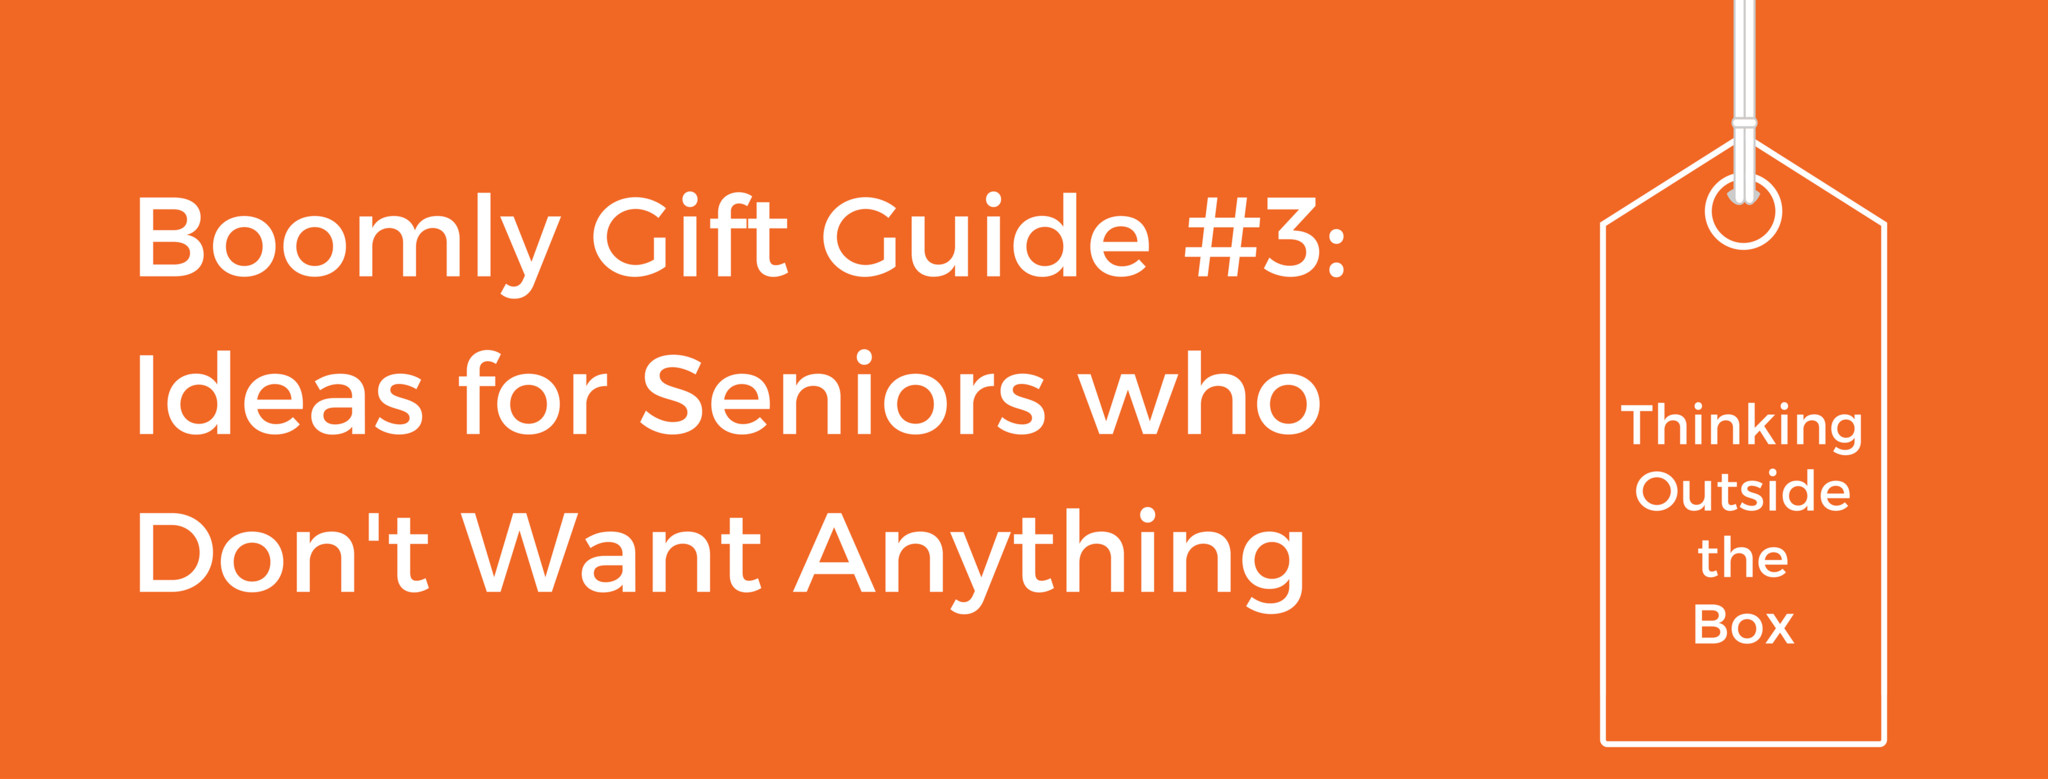 Gift Ideas For Elderly Father
 Creative Gift Ideas for Seniors Grandparents and Elderly